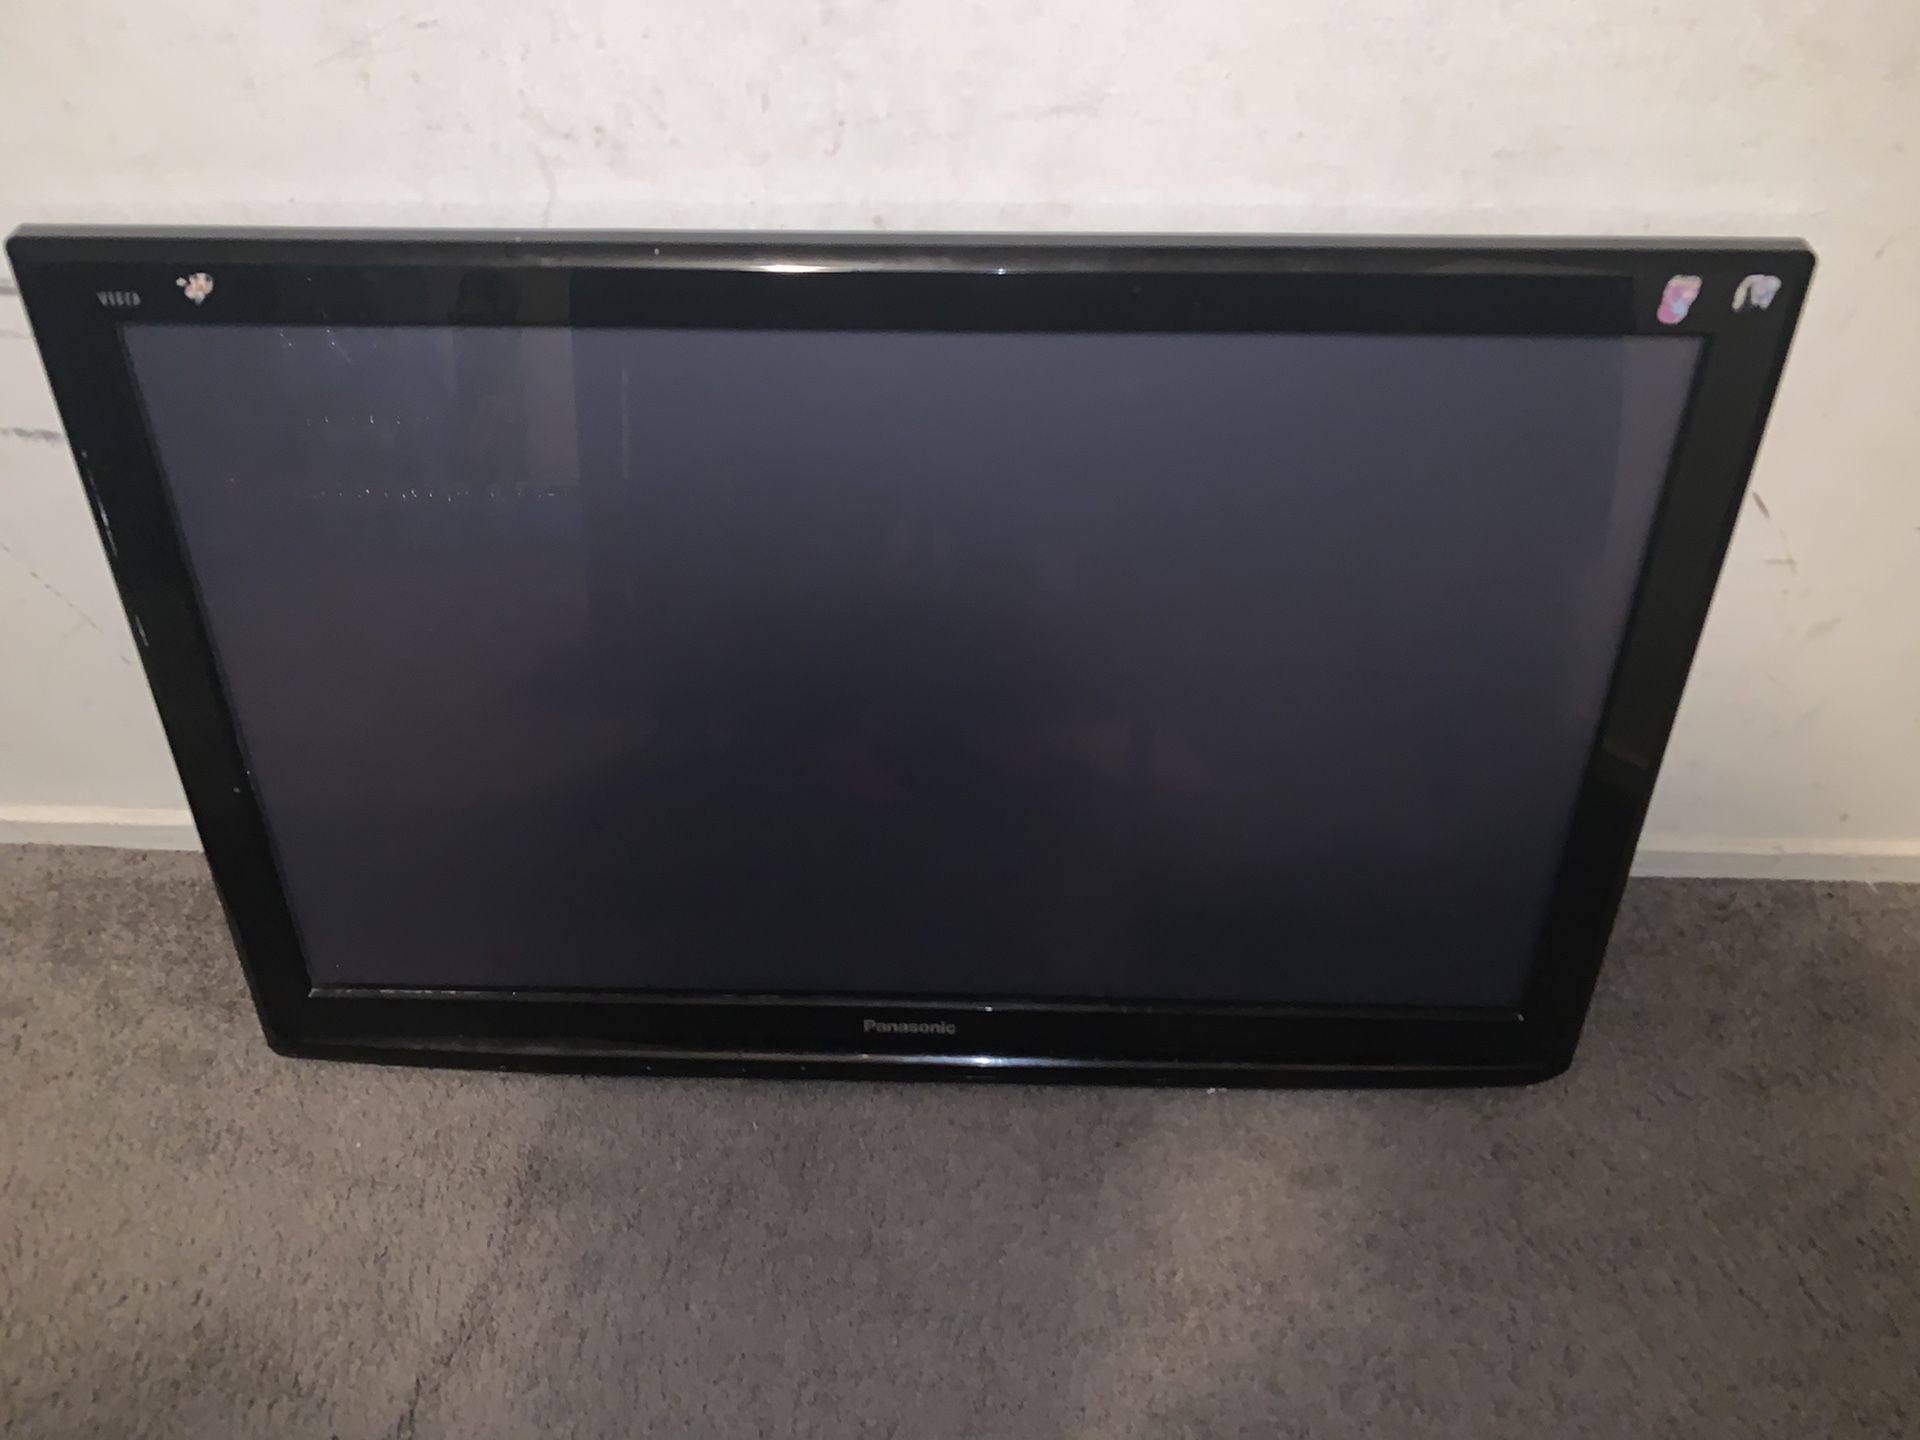 Panasonic Tv’s. ITS TWO TV’S NOT ONE. SELLING TOGETHER FOR 250$ one has Tv mount one doesn’t nothing is wrong with them. They both work.